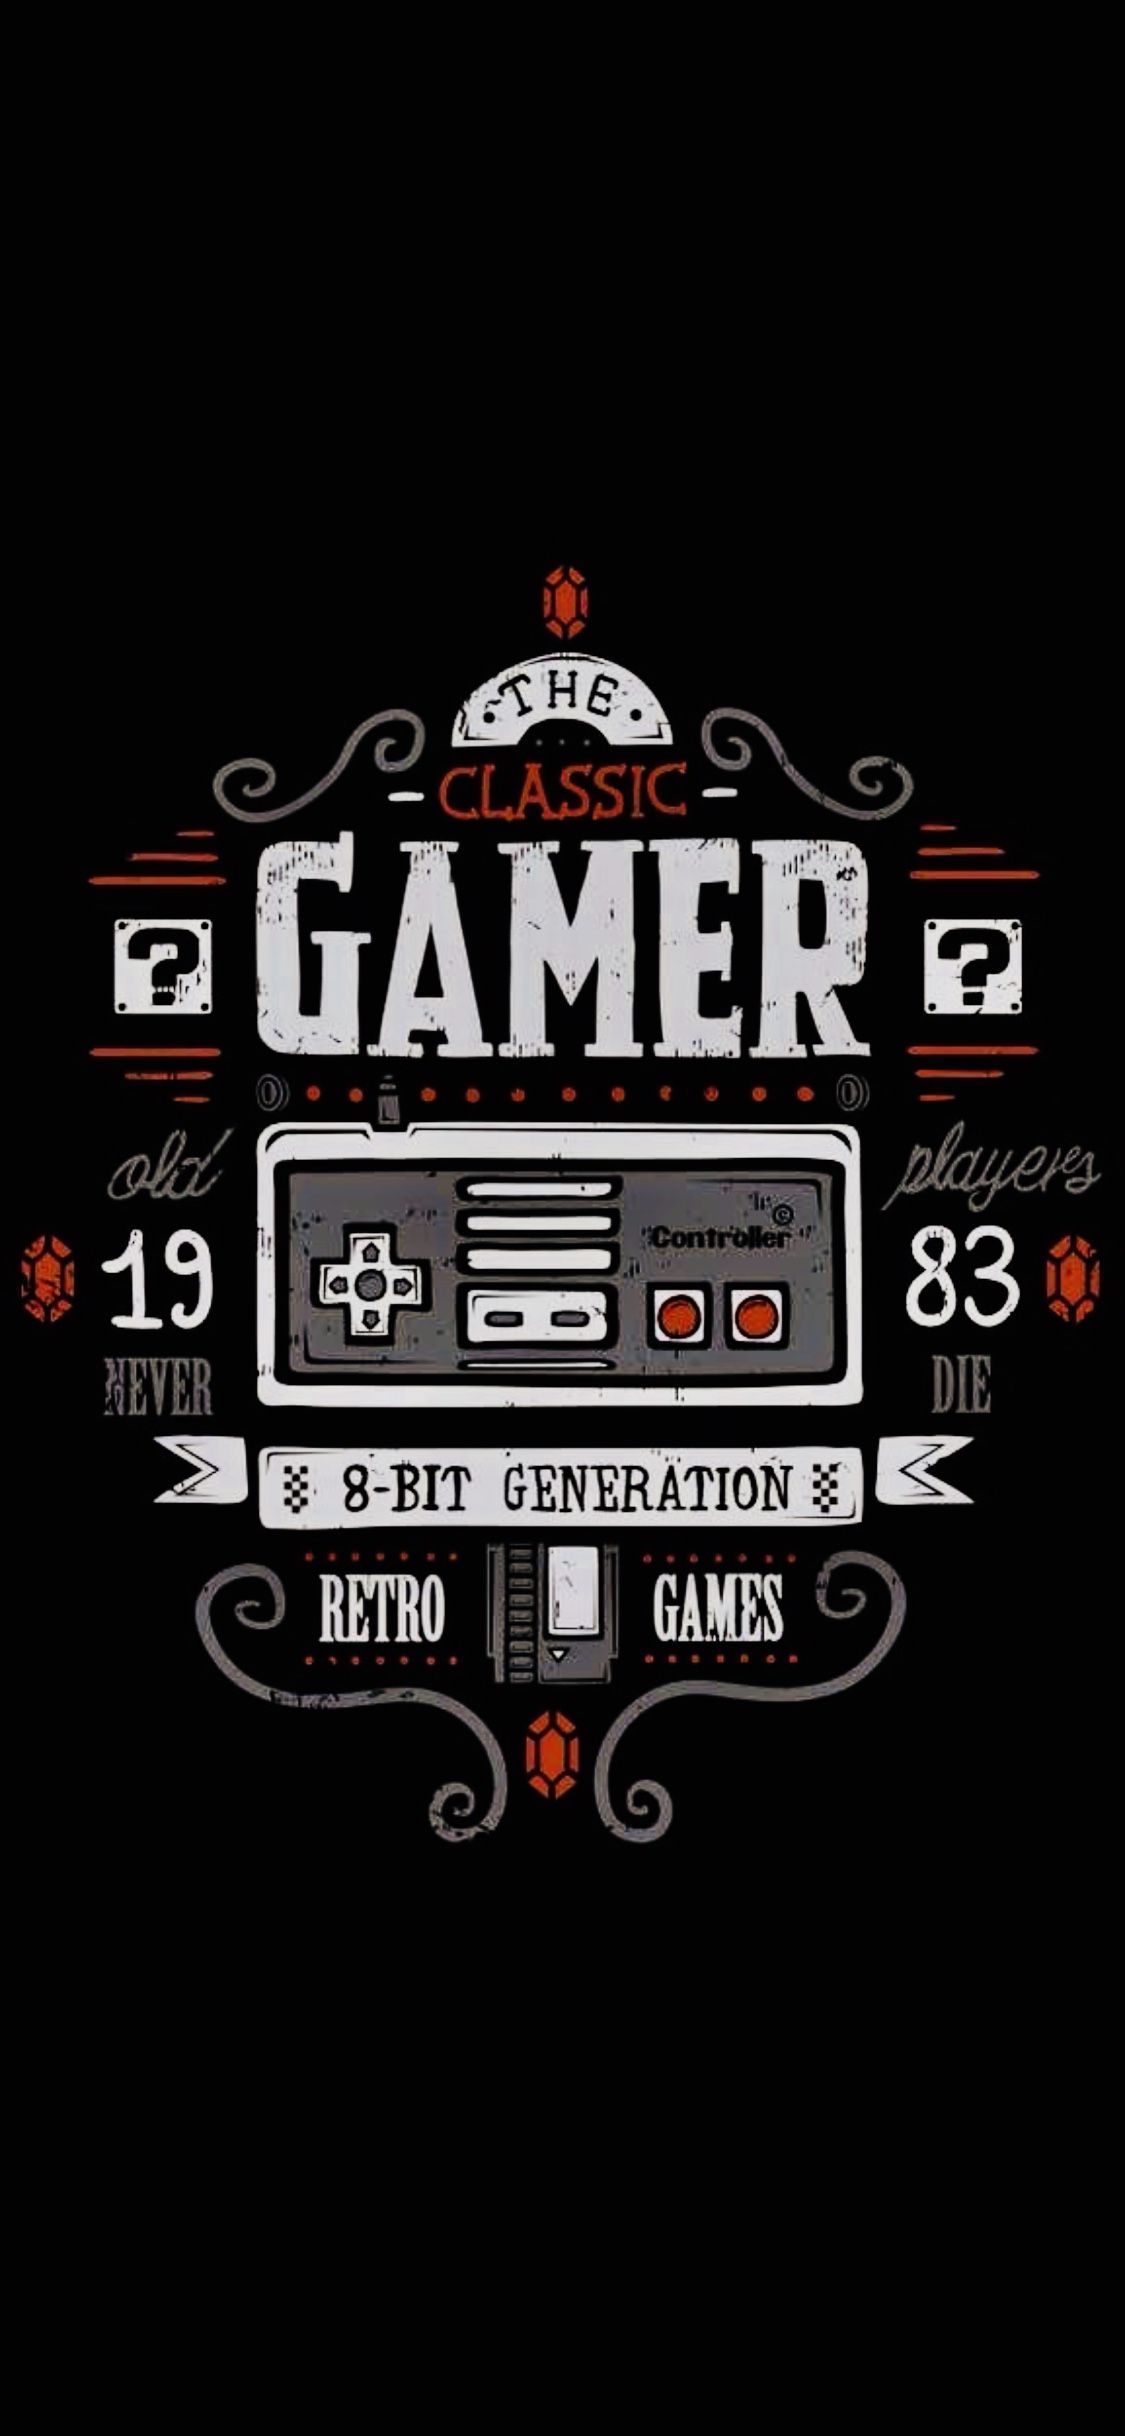 wallpaper iphone x. Video game posters, Classic games, Retro gaming